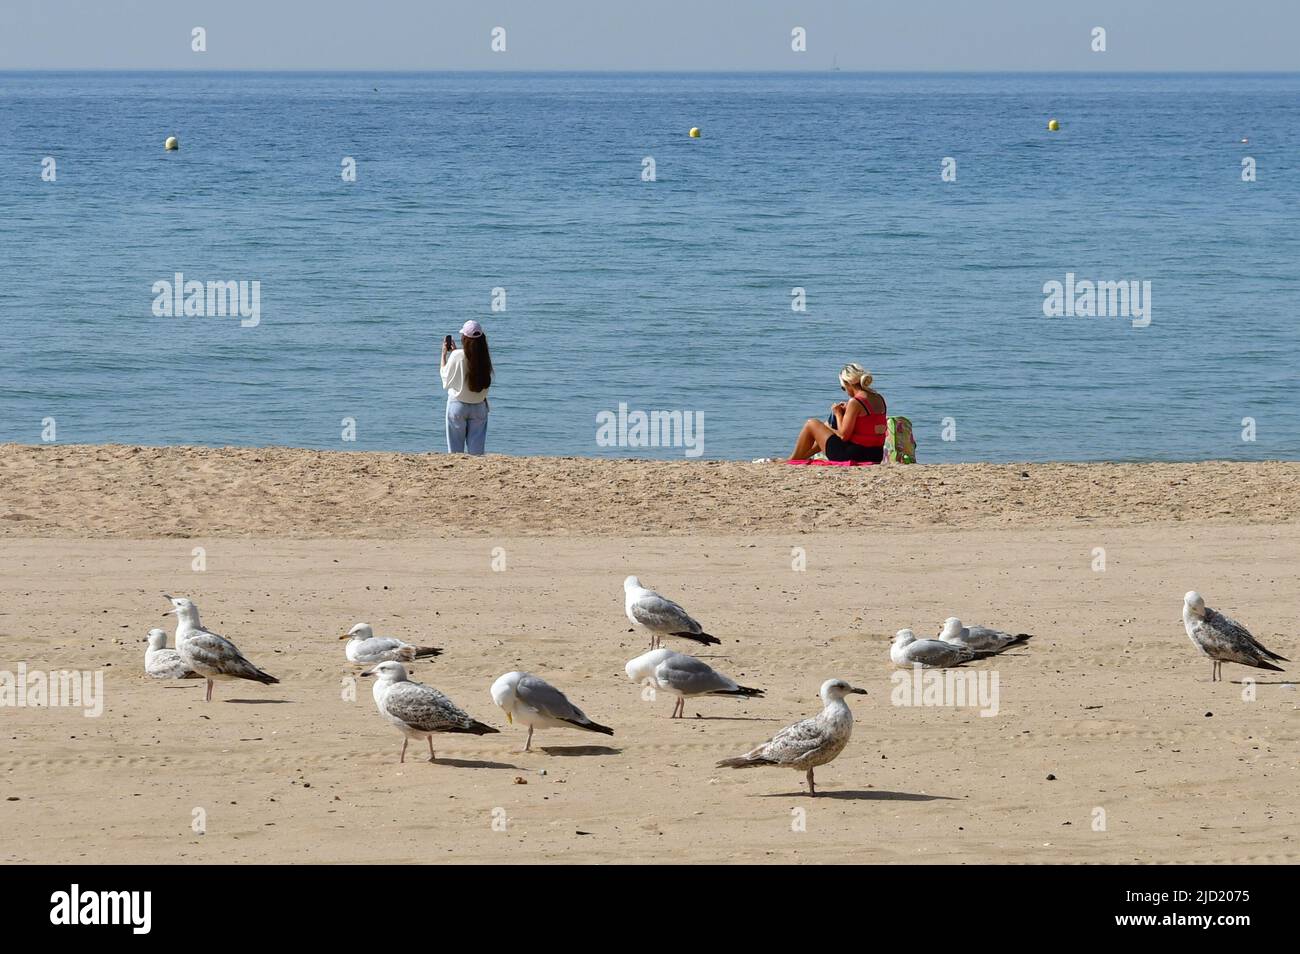 Boscombe, Bournemouth, Dorset, UK. 17th June, 2022. Weather. Set to be the hottest day of the year so far as the short heatwave peaks. People head to the beach for the sunshine and some fresher sea air. Early arrivers find plenty of space. Credit: Paul Biggins/Alamy Live News Stock Photo